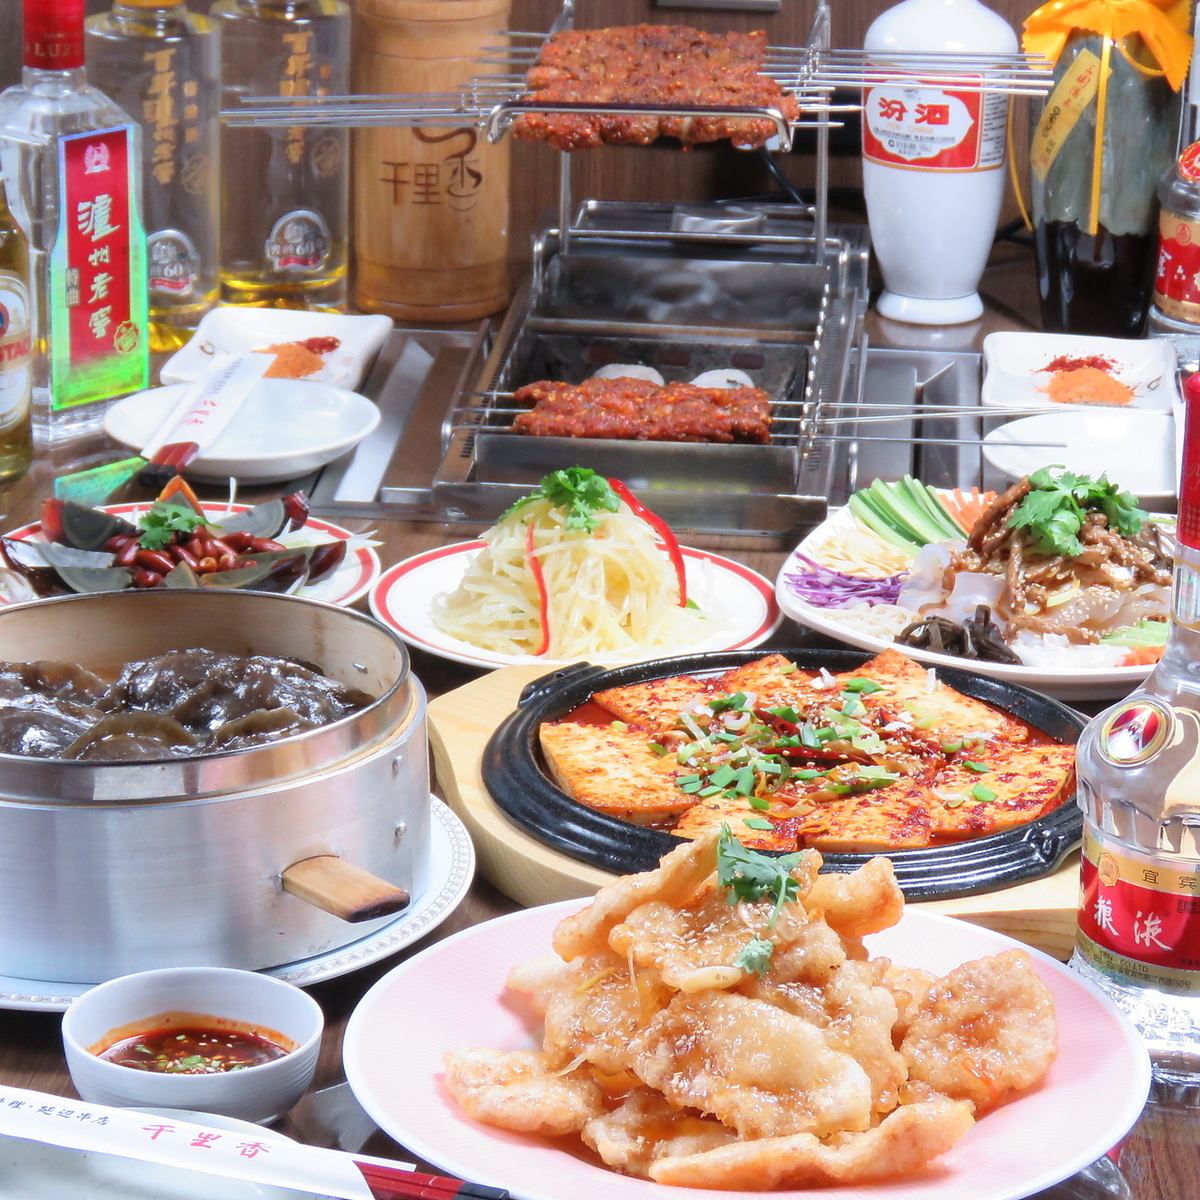 Enjoy authentic Chinese cuisine♪ We also have course meals recommended for banquets and drinking parties!